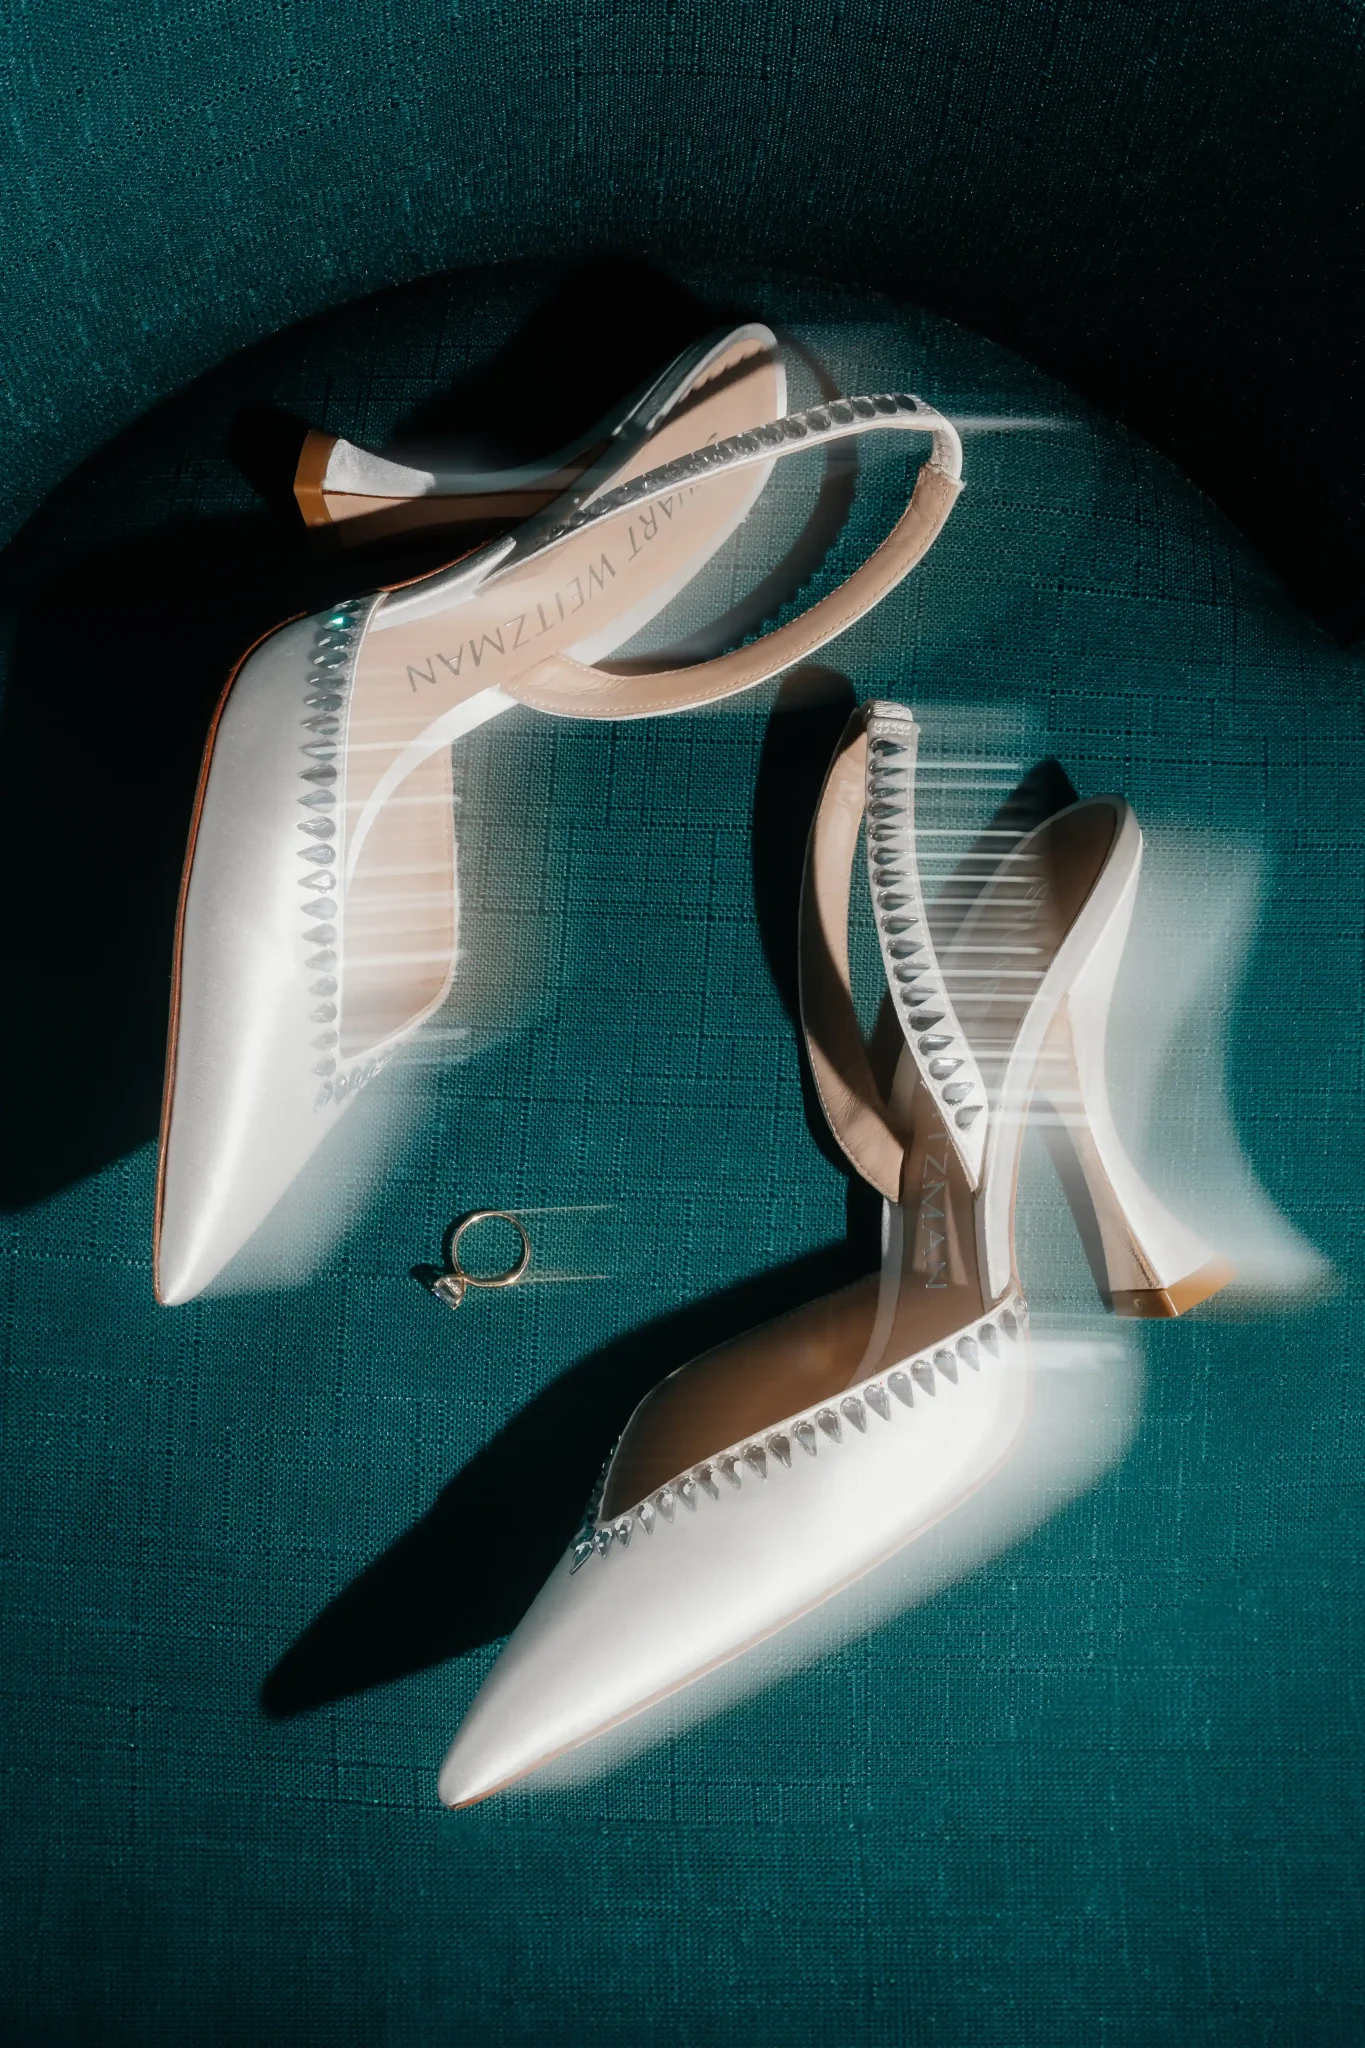 A pair of white shoes and a pair of earrings.